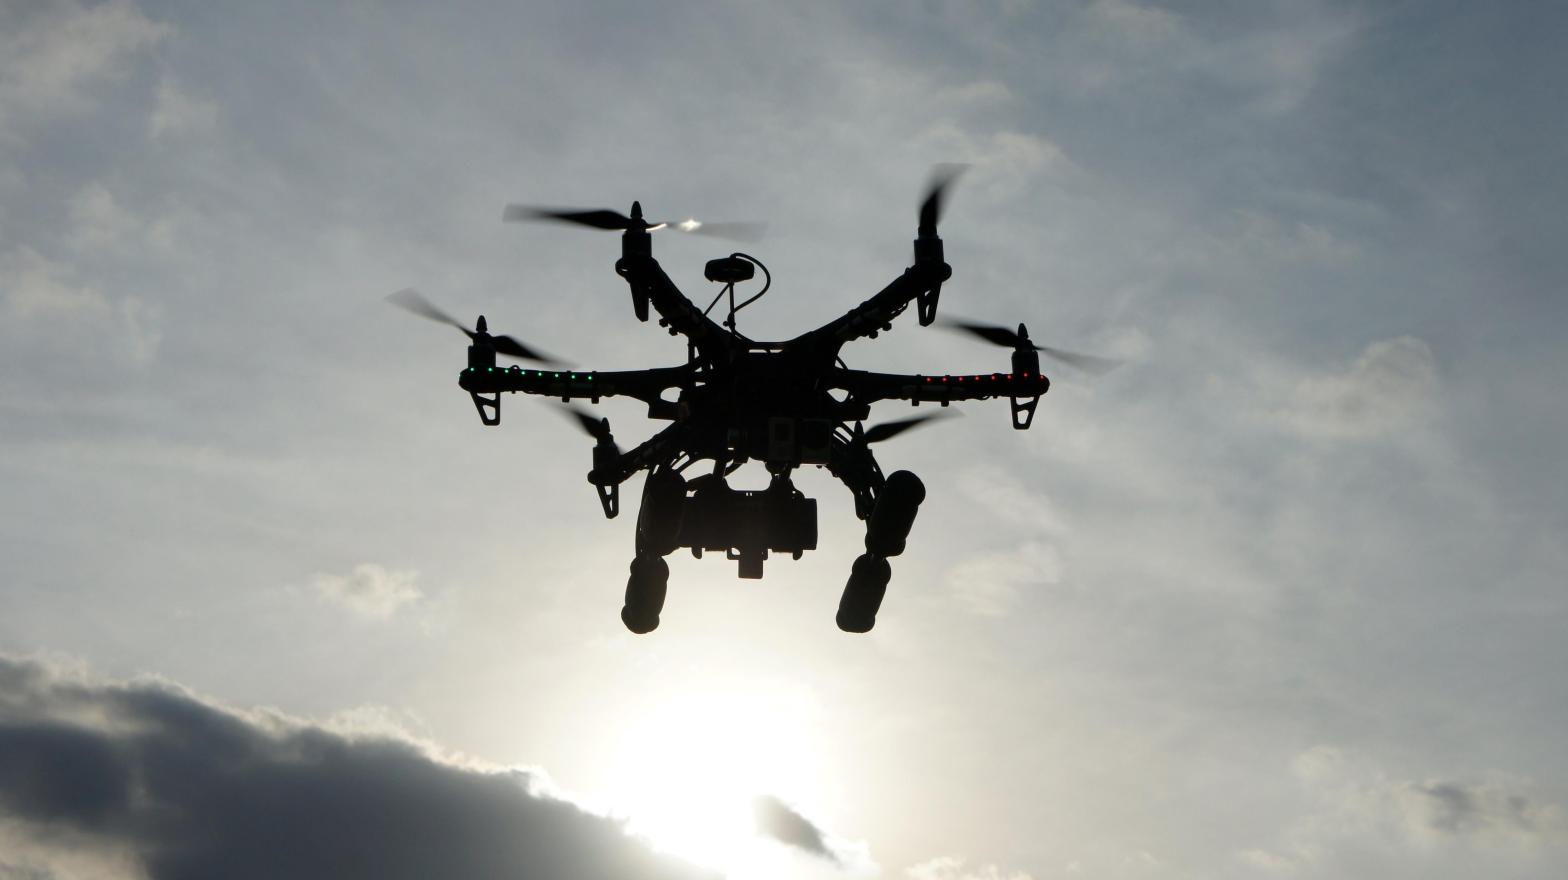 The White House is claiming that drones have introduced new risks to public safety. (Image: Richard Newstead, Getty Images)